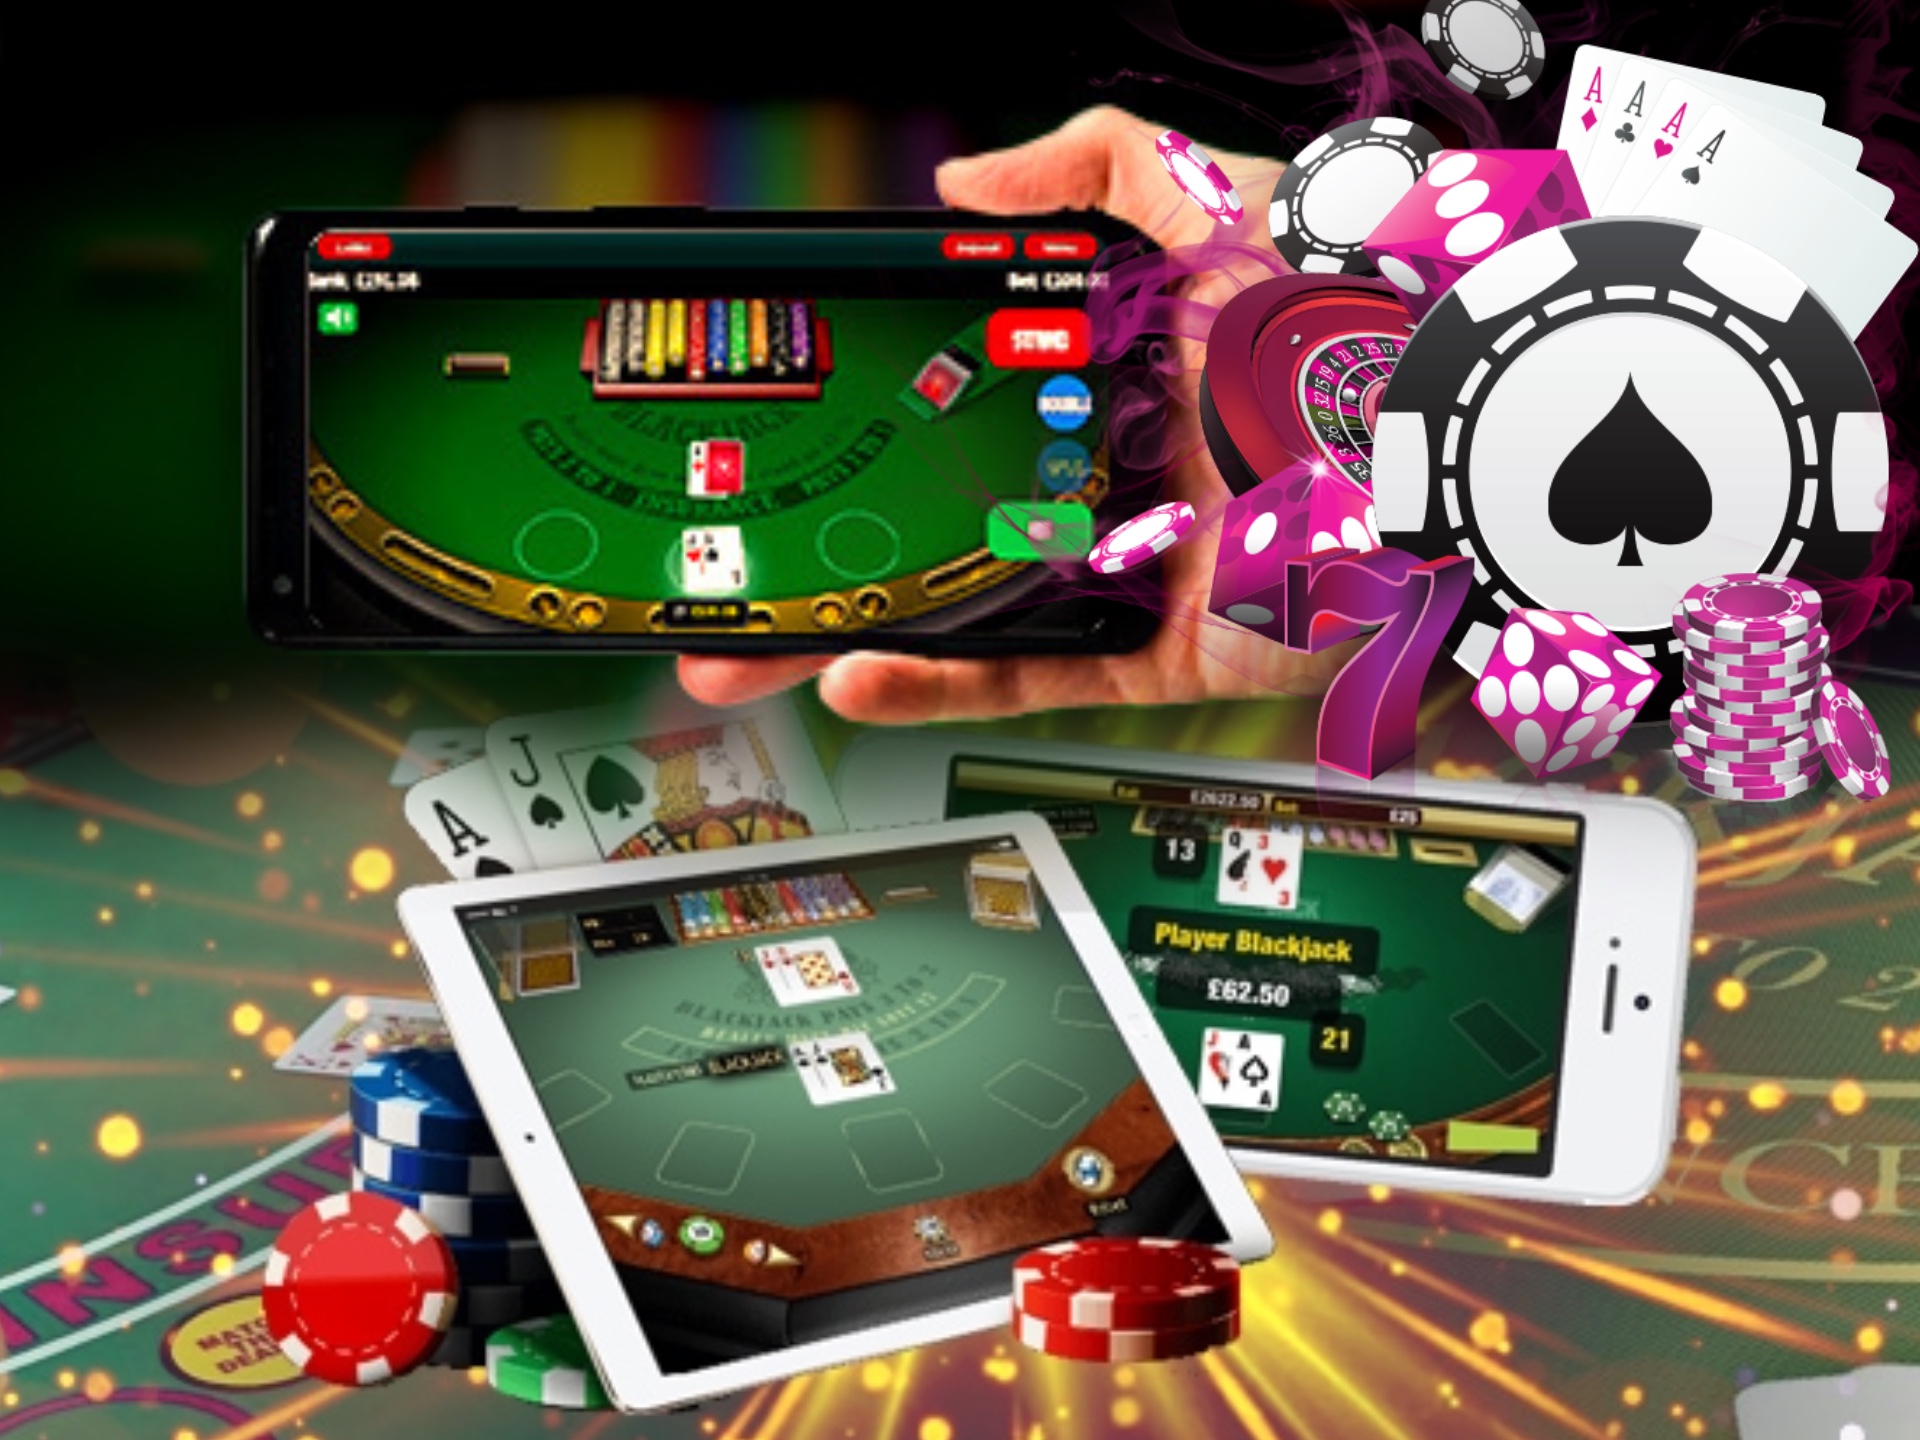 Almost all the best and popular mobile casinos have blackjack in their games list.